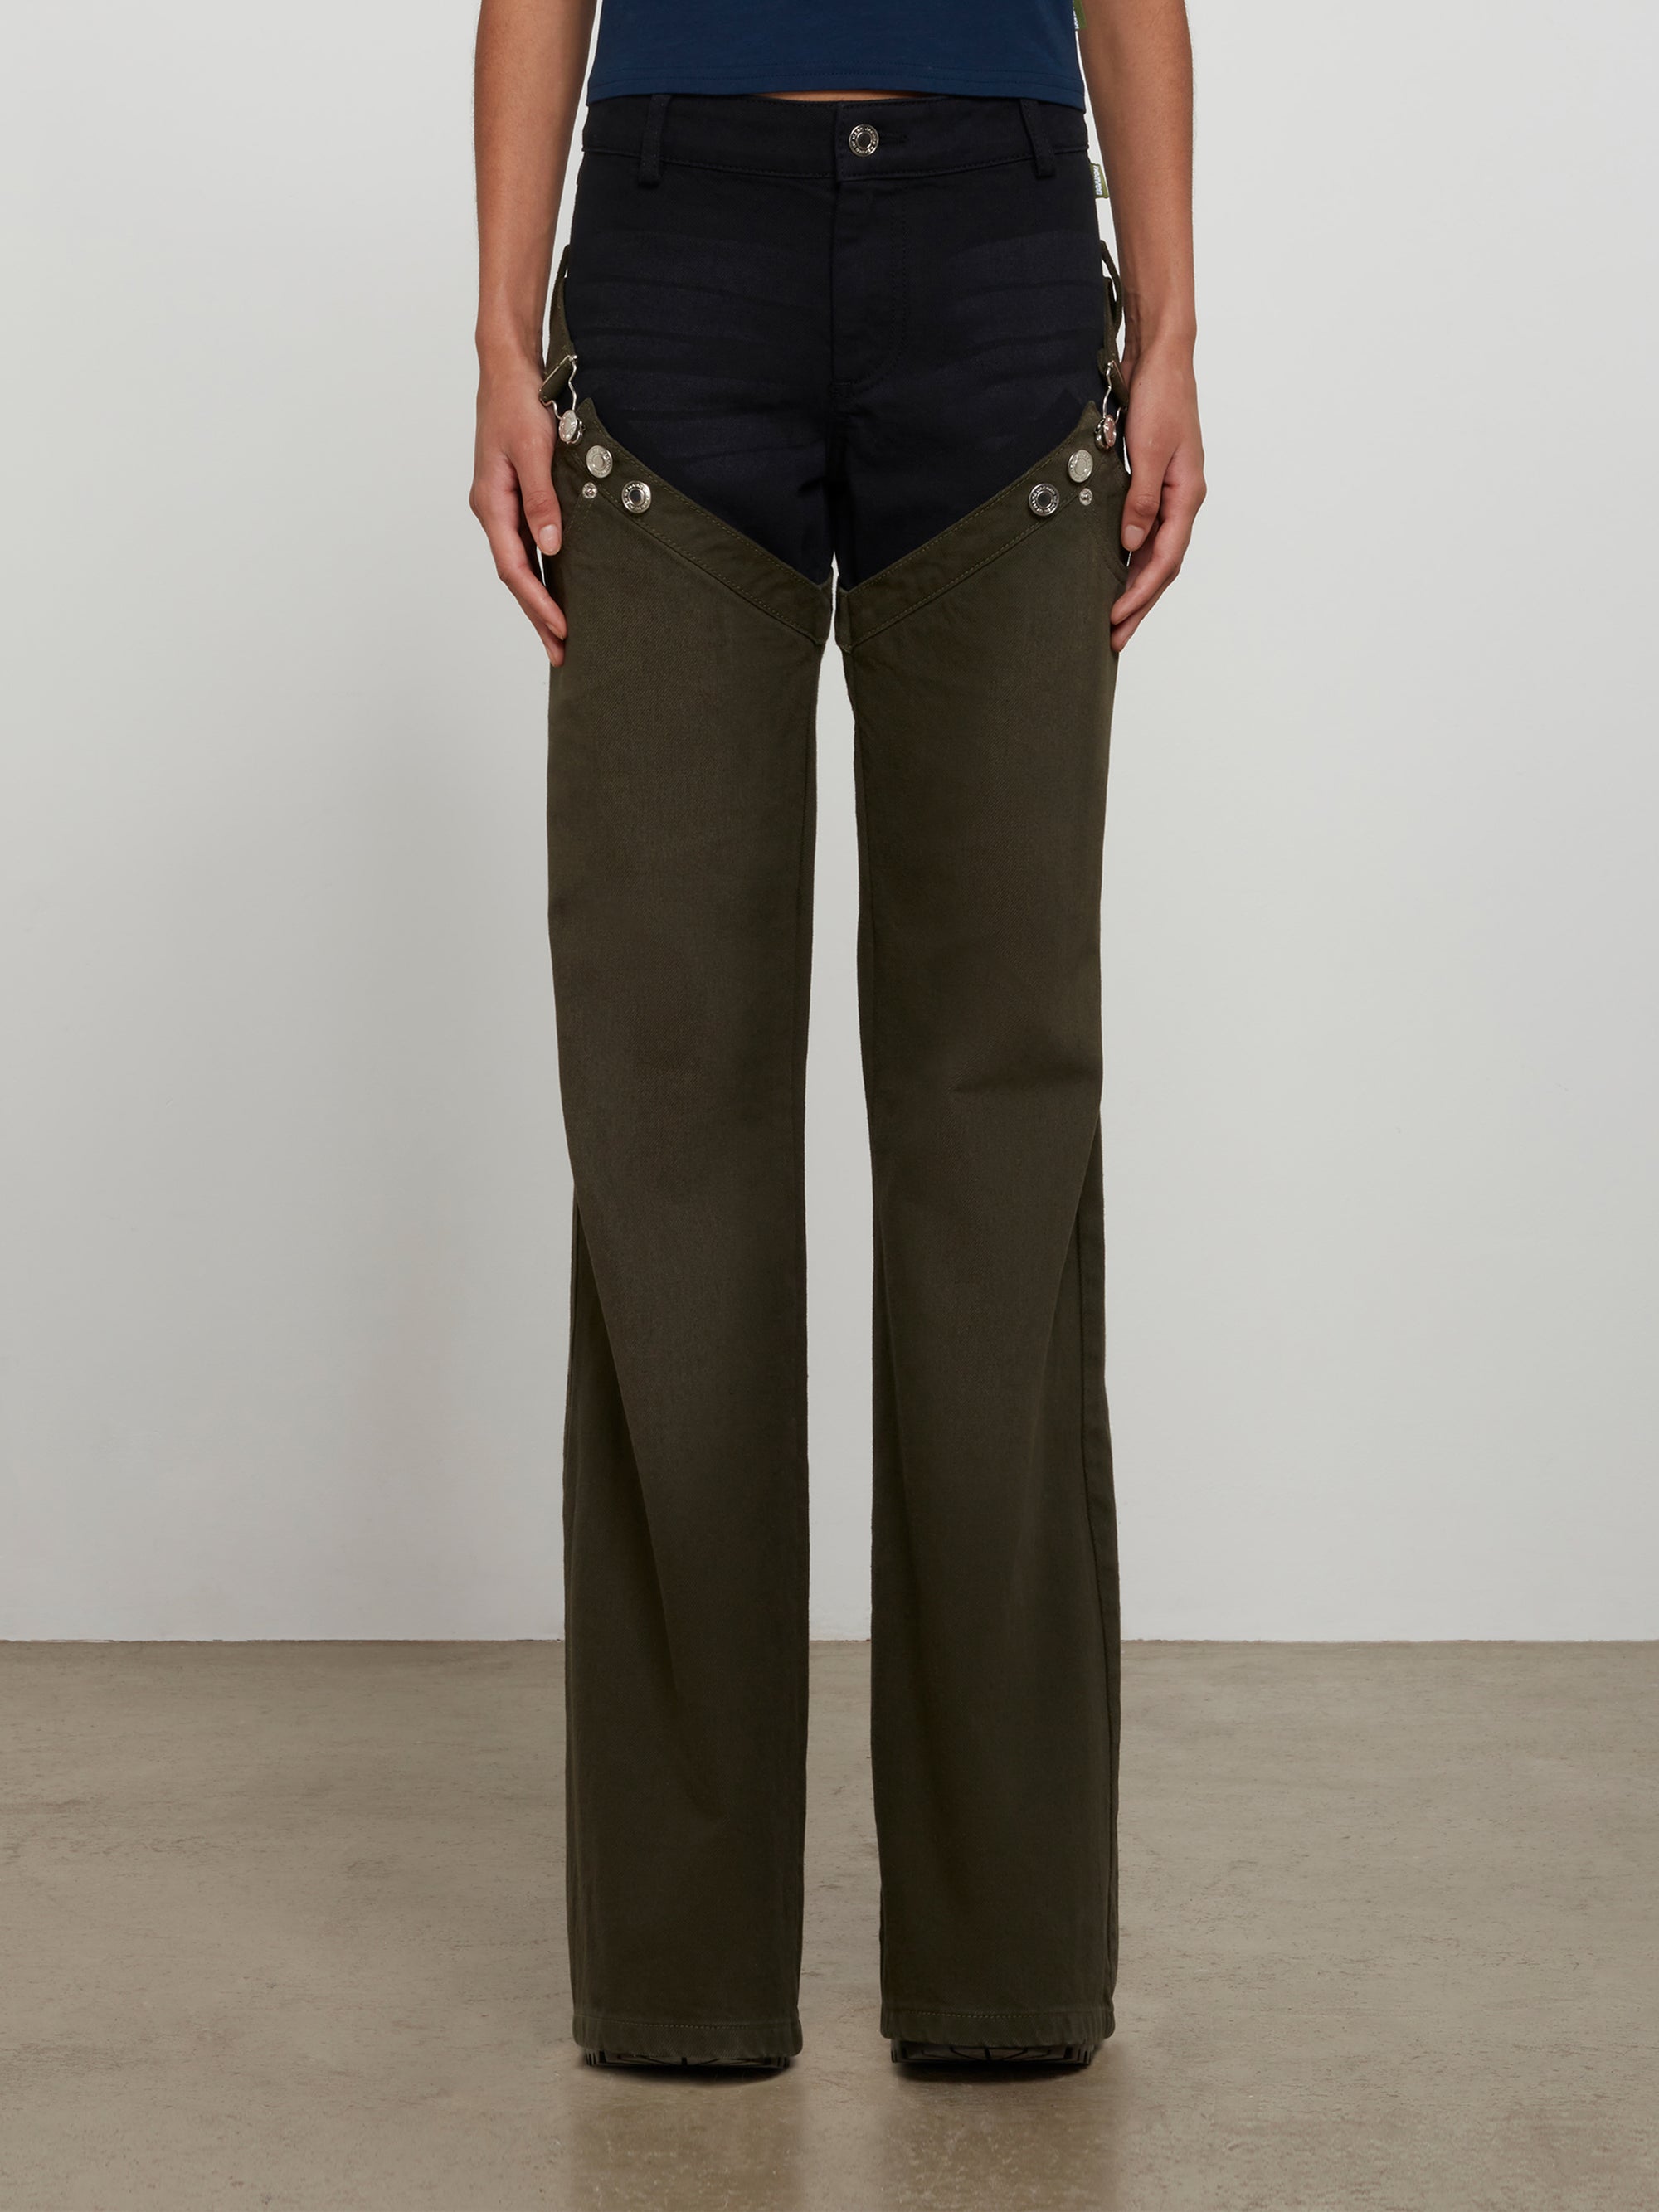 Heaven by Marc Jacobs - Women’s Chaps Flare Pants - (Olive/Black) view 2